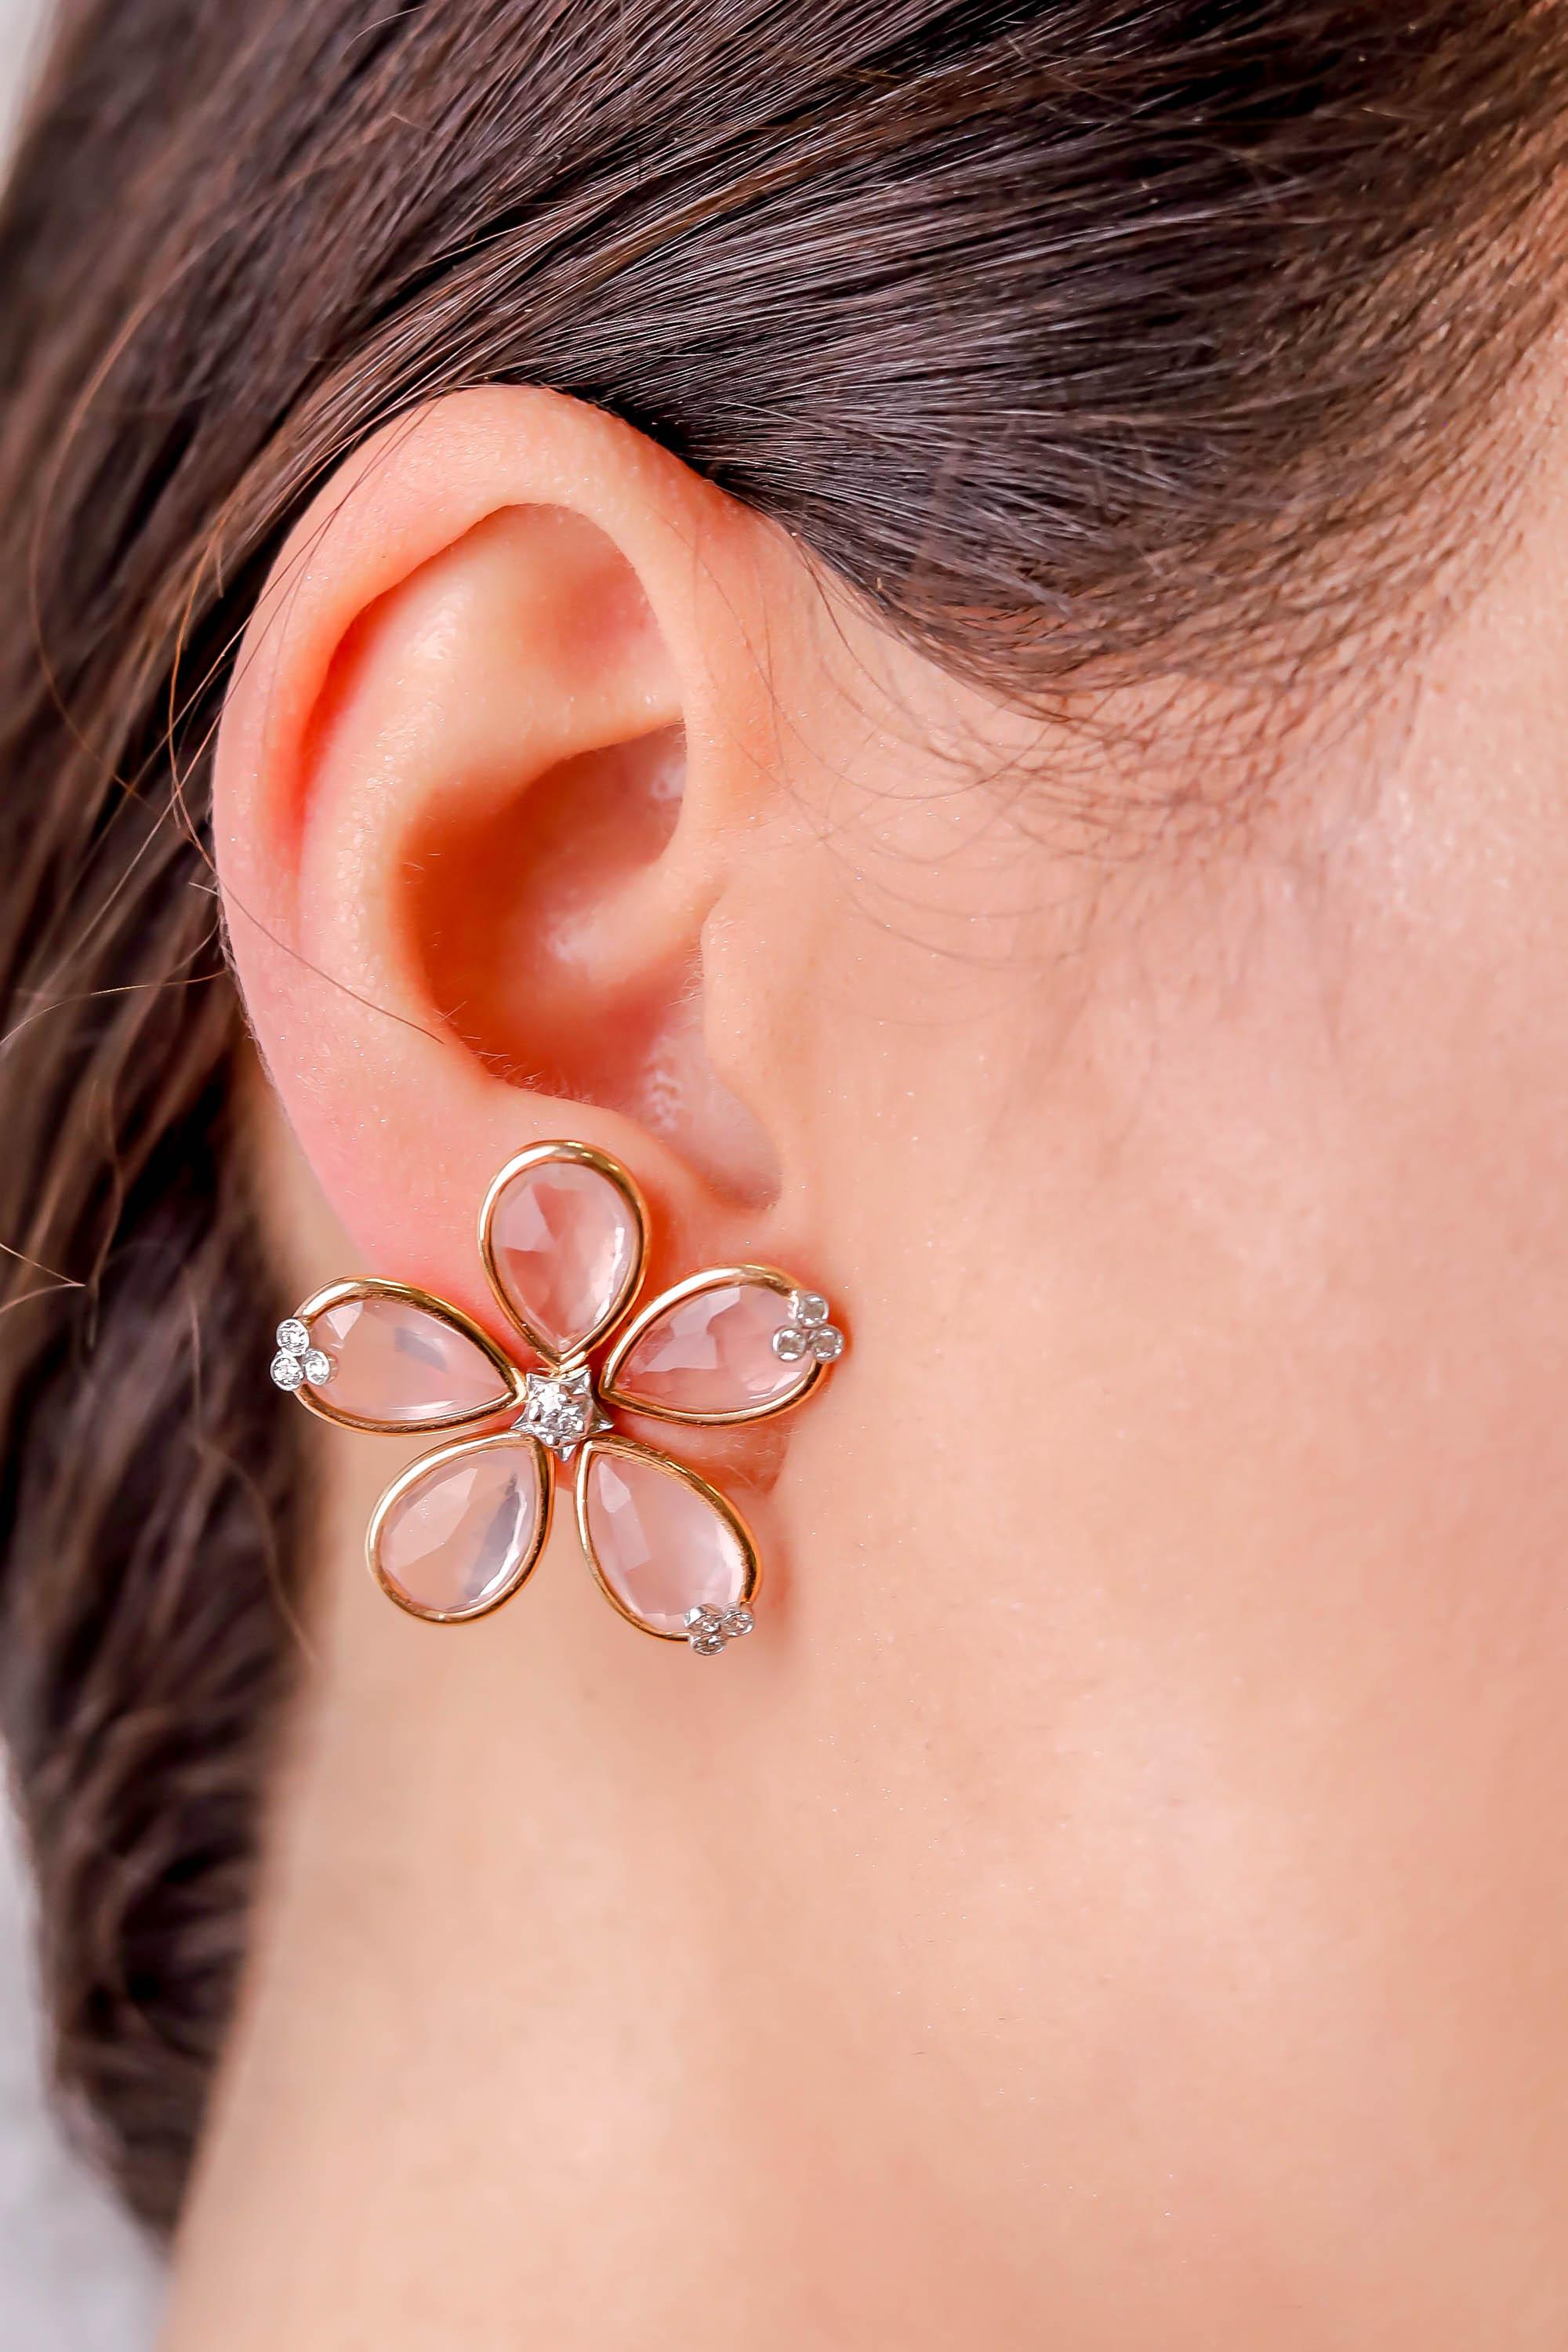 18 Karat Gold Rose Quartz Diamond Gold Daisy Flower Stud Earrings Fine Jewelry

Crafty and elegant pear-shaped rose quartz, creating a delicate daisy flower earring. Accented by brilliant round diamonds of high quality. A great addition to your